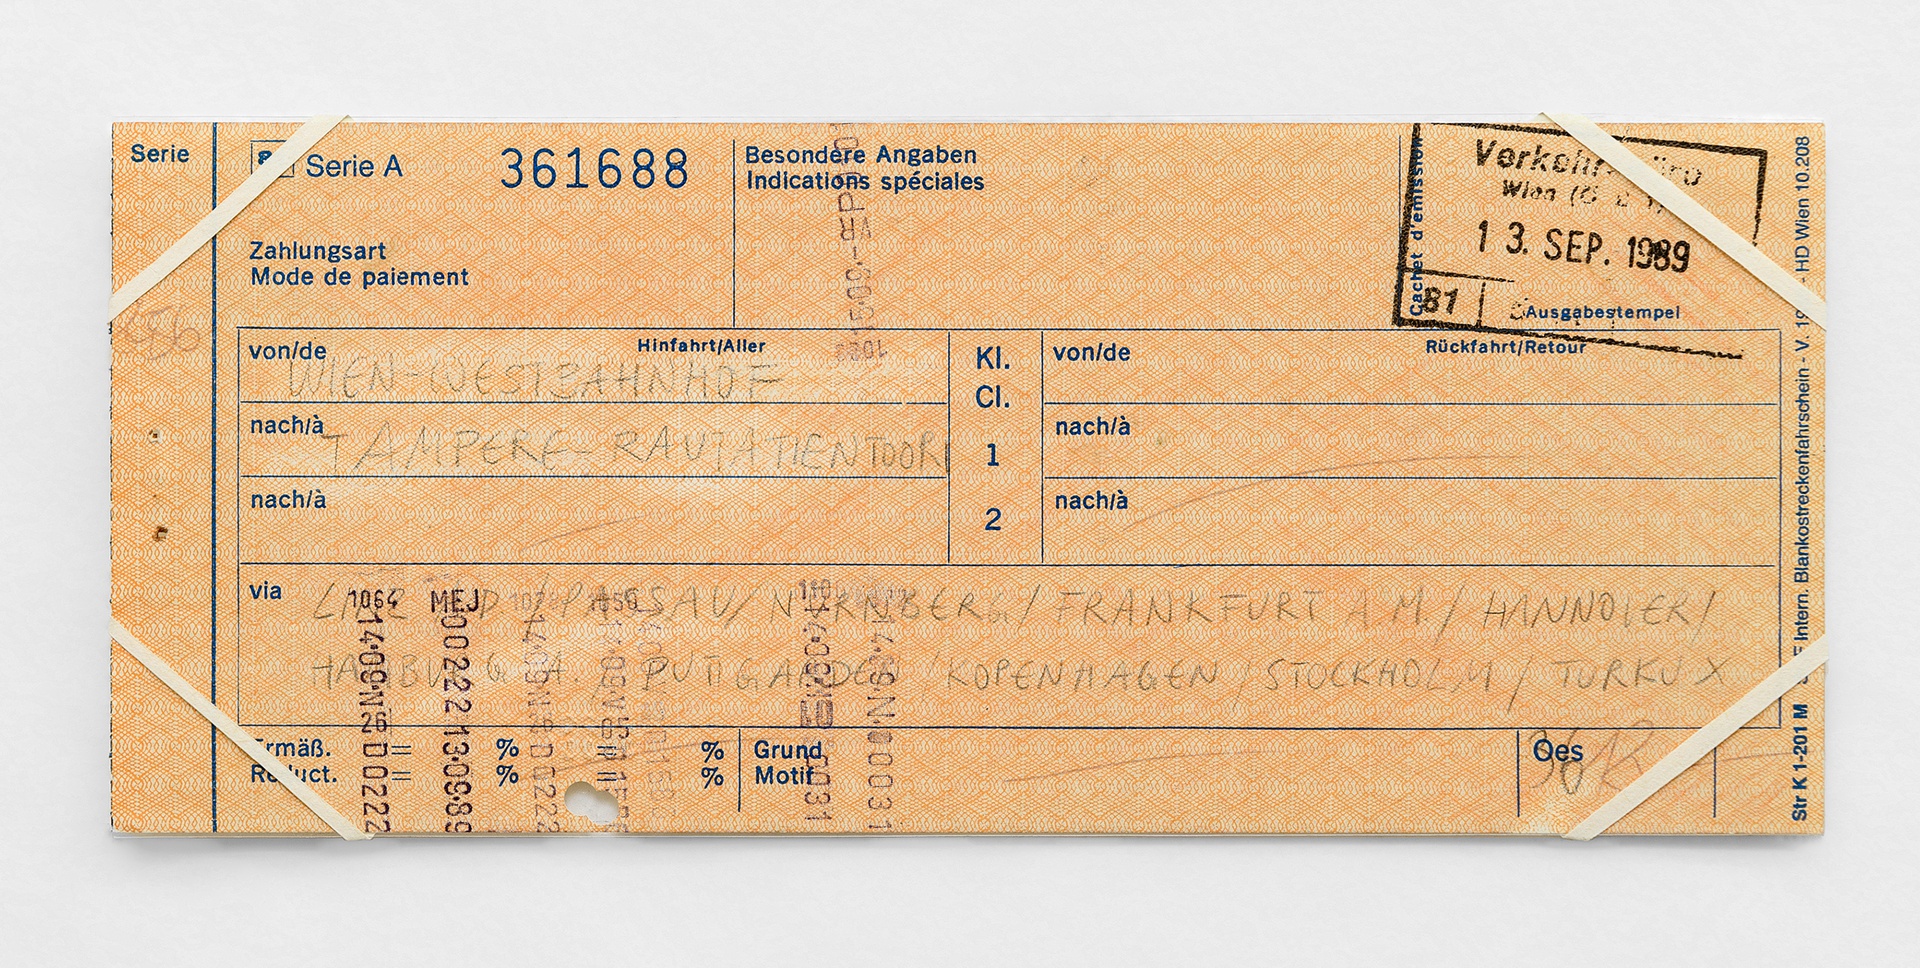 Ariane Mueller, Illegal Travel Documents (Wien – Tampare), 1990 – 1993eraser and pencil and on travel document, PVC foil, paper strips8,3 x 20 cm